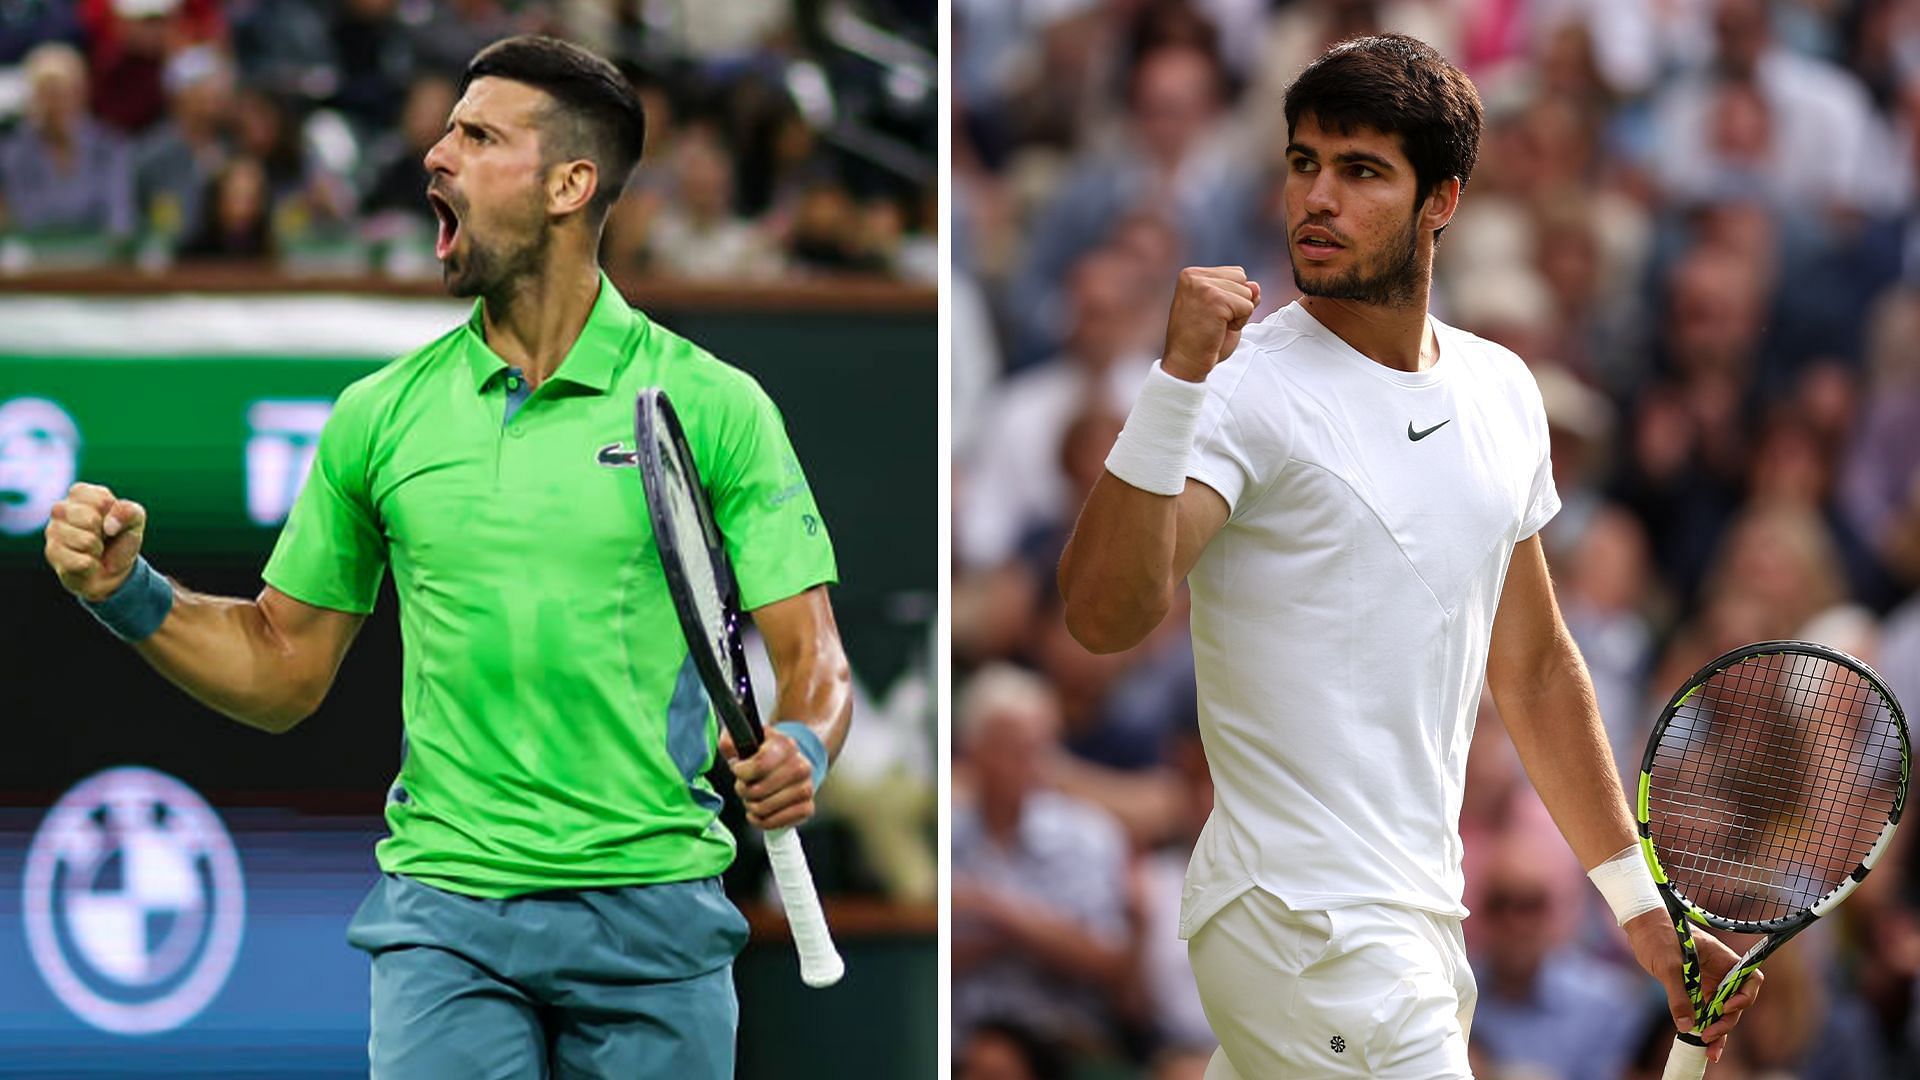 Novak Djokovic and Carlos Alcaraz are the top two ranked players in this week